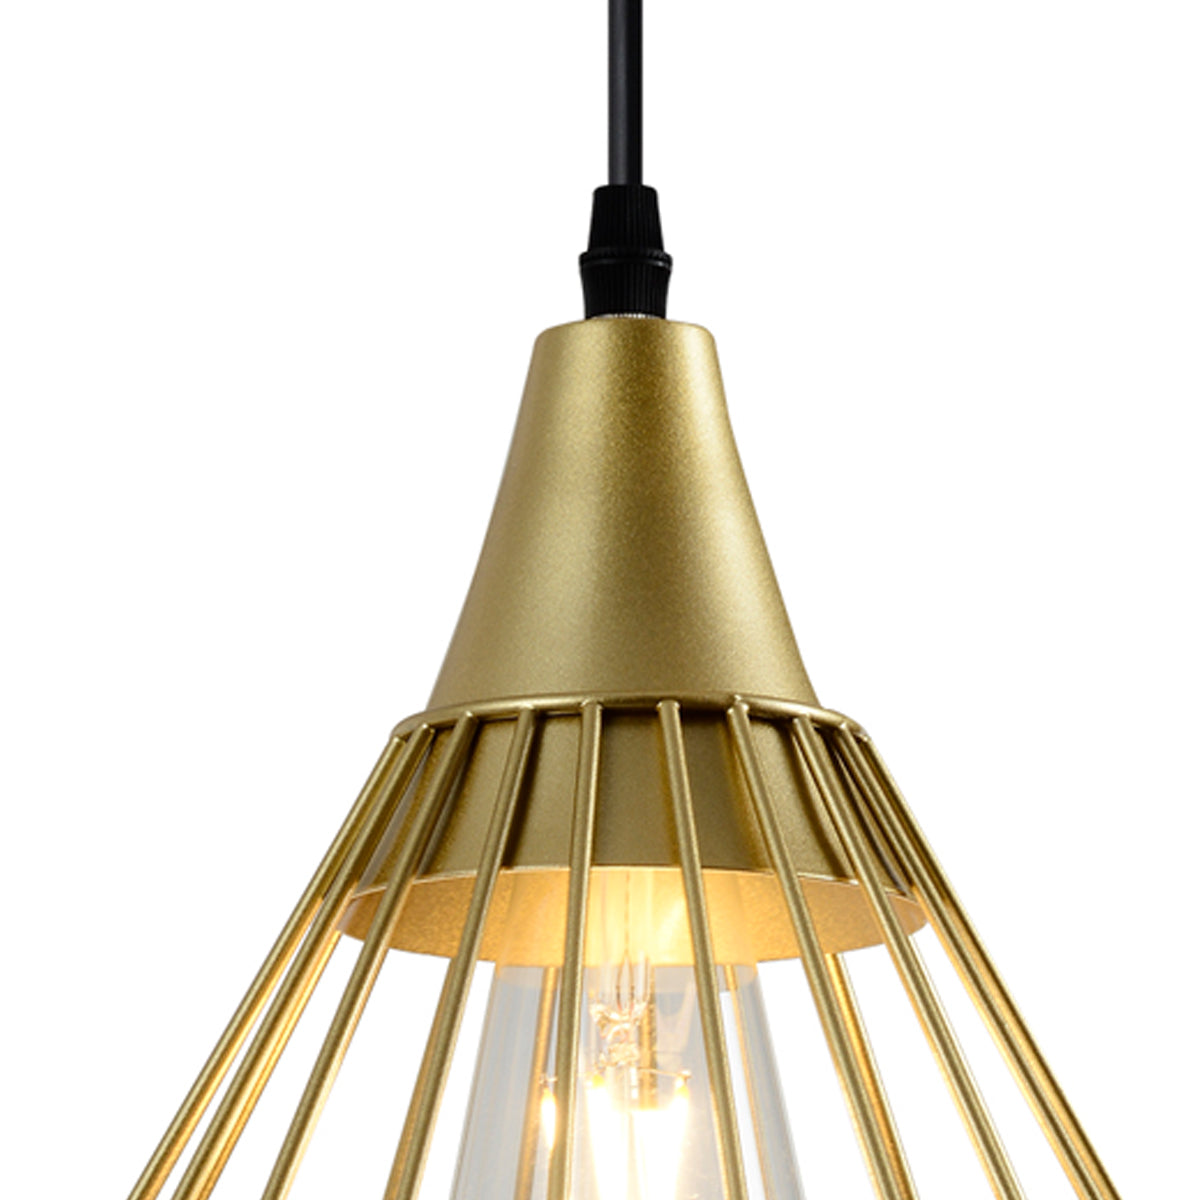 This classic light fitting a with large gold metal shade will perfectly fit into most home arrangements. The bulb hidden in a metal lampshade gives a very interesting visual effect when the light is turned on and the wires can be adjusted to your desired height.